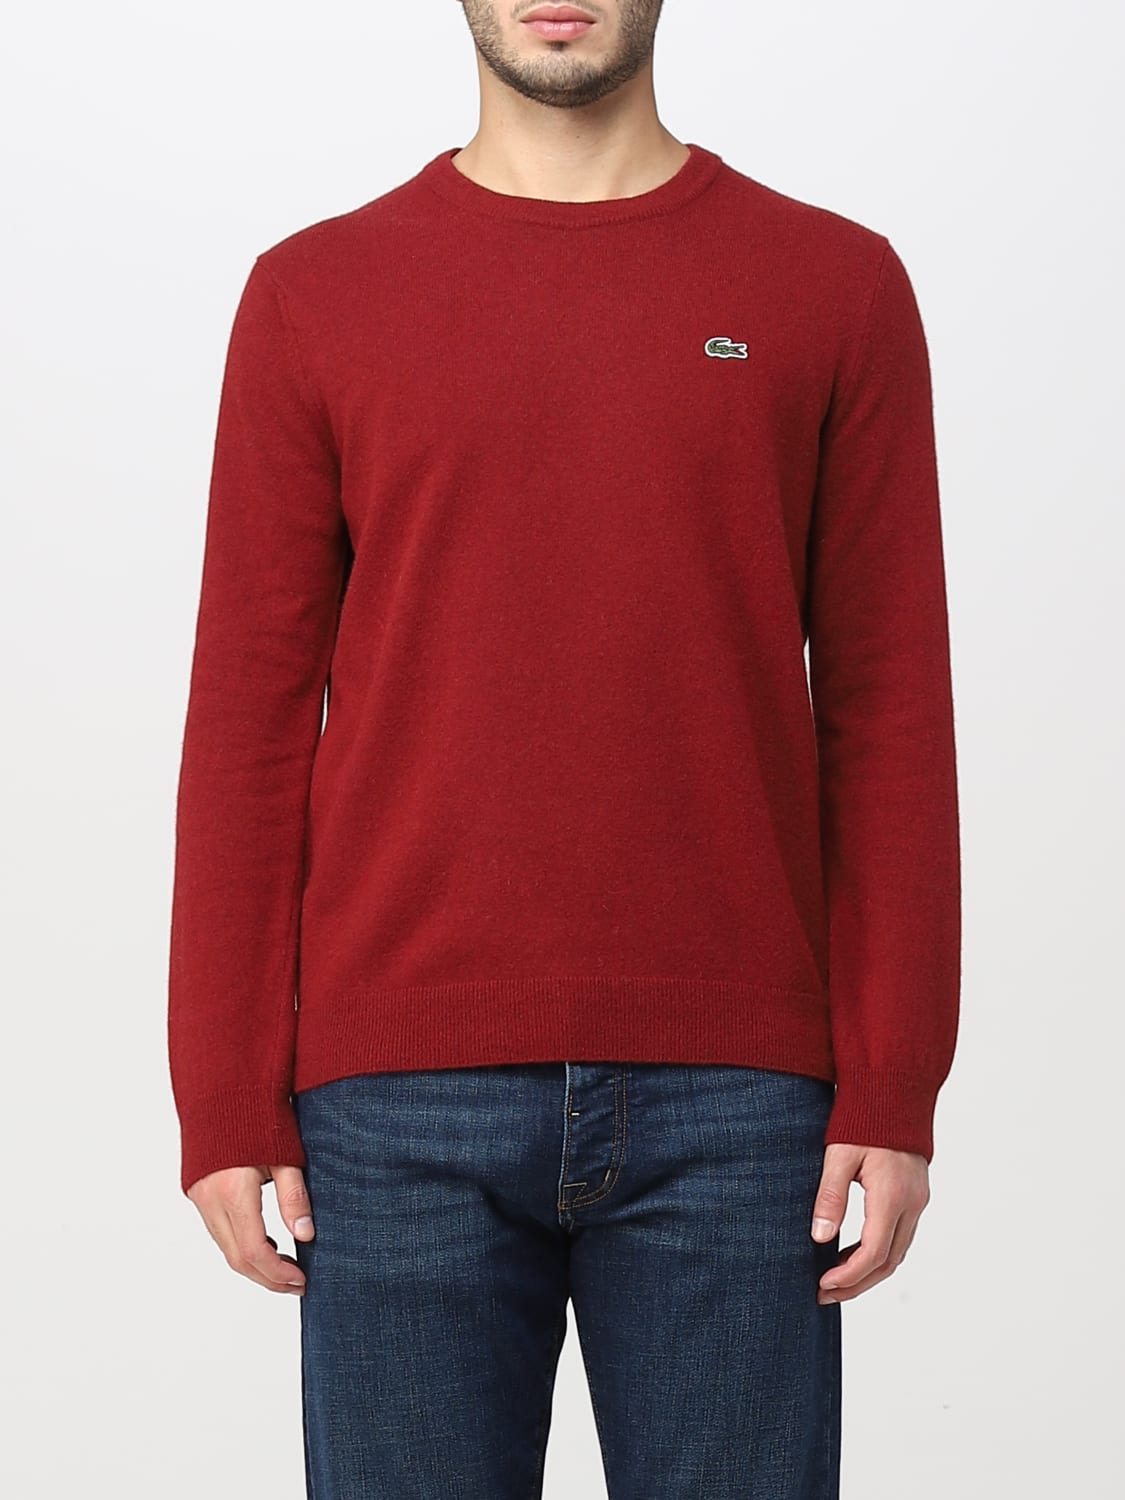 viernes Sentido táctil marzo Lacoste Outlet: sweater for man - Red | Lacoste sweater AH3449 online on  GIGLIO.COM